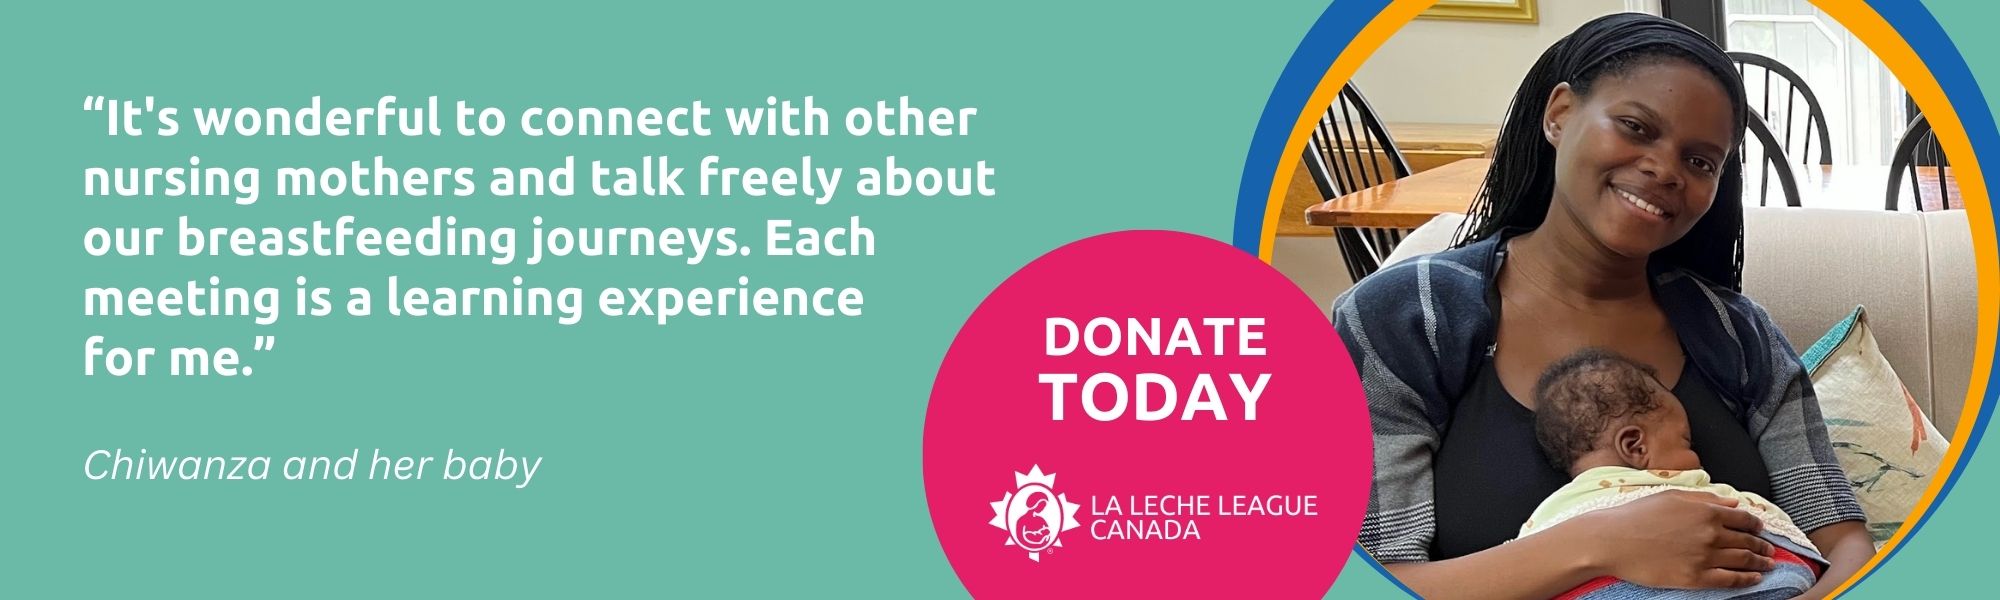 Home  La Leche League Canada - Breastfeeding Support and Information